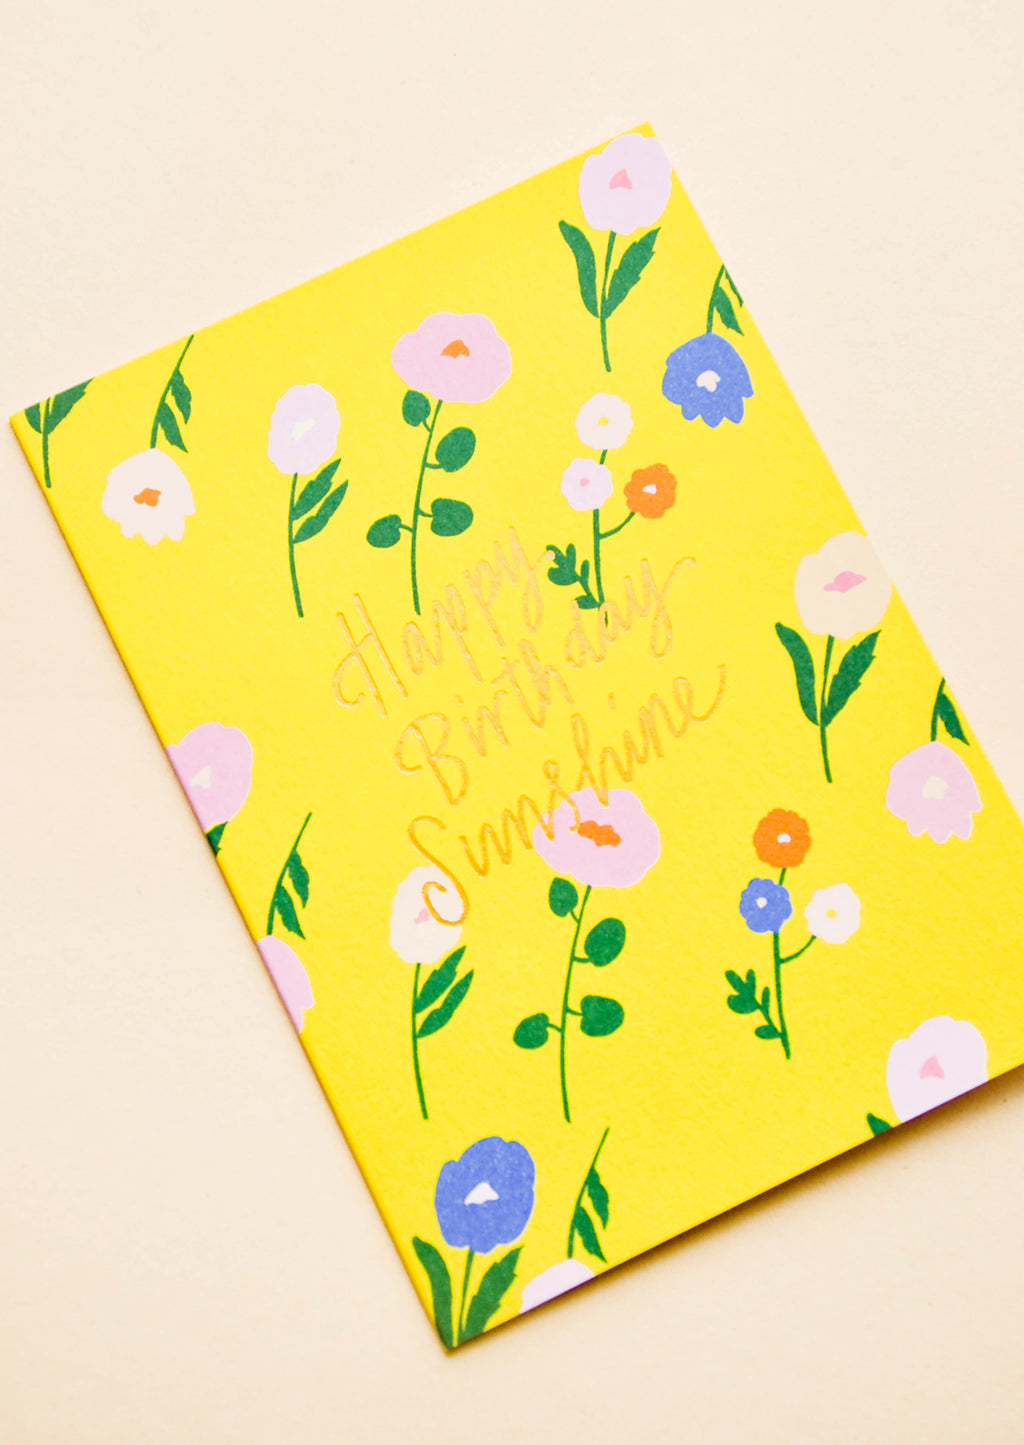 2: Greeting card in sunny yellow with flowers and "Happy Birthday Sunshine" in gold text